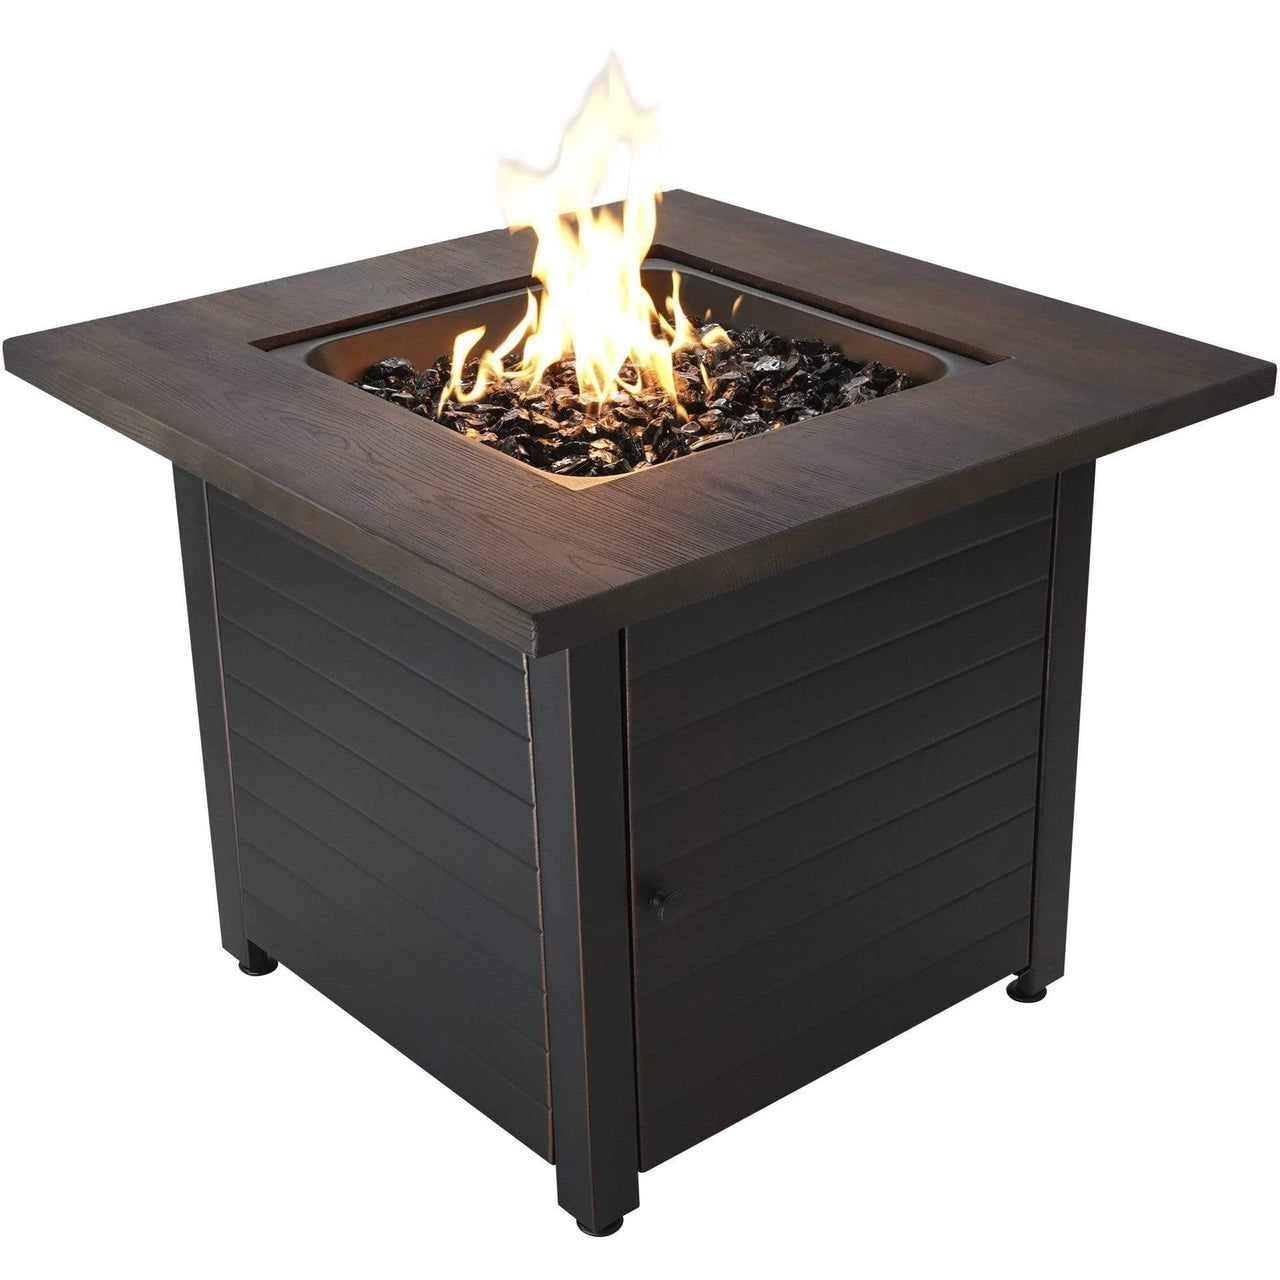 Endless Summer The Spencer, 30" LP Gas Outdoor Fire Pit with Printed Resin Mantel - GAD15297ES - Fire Pit Stock